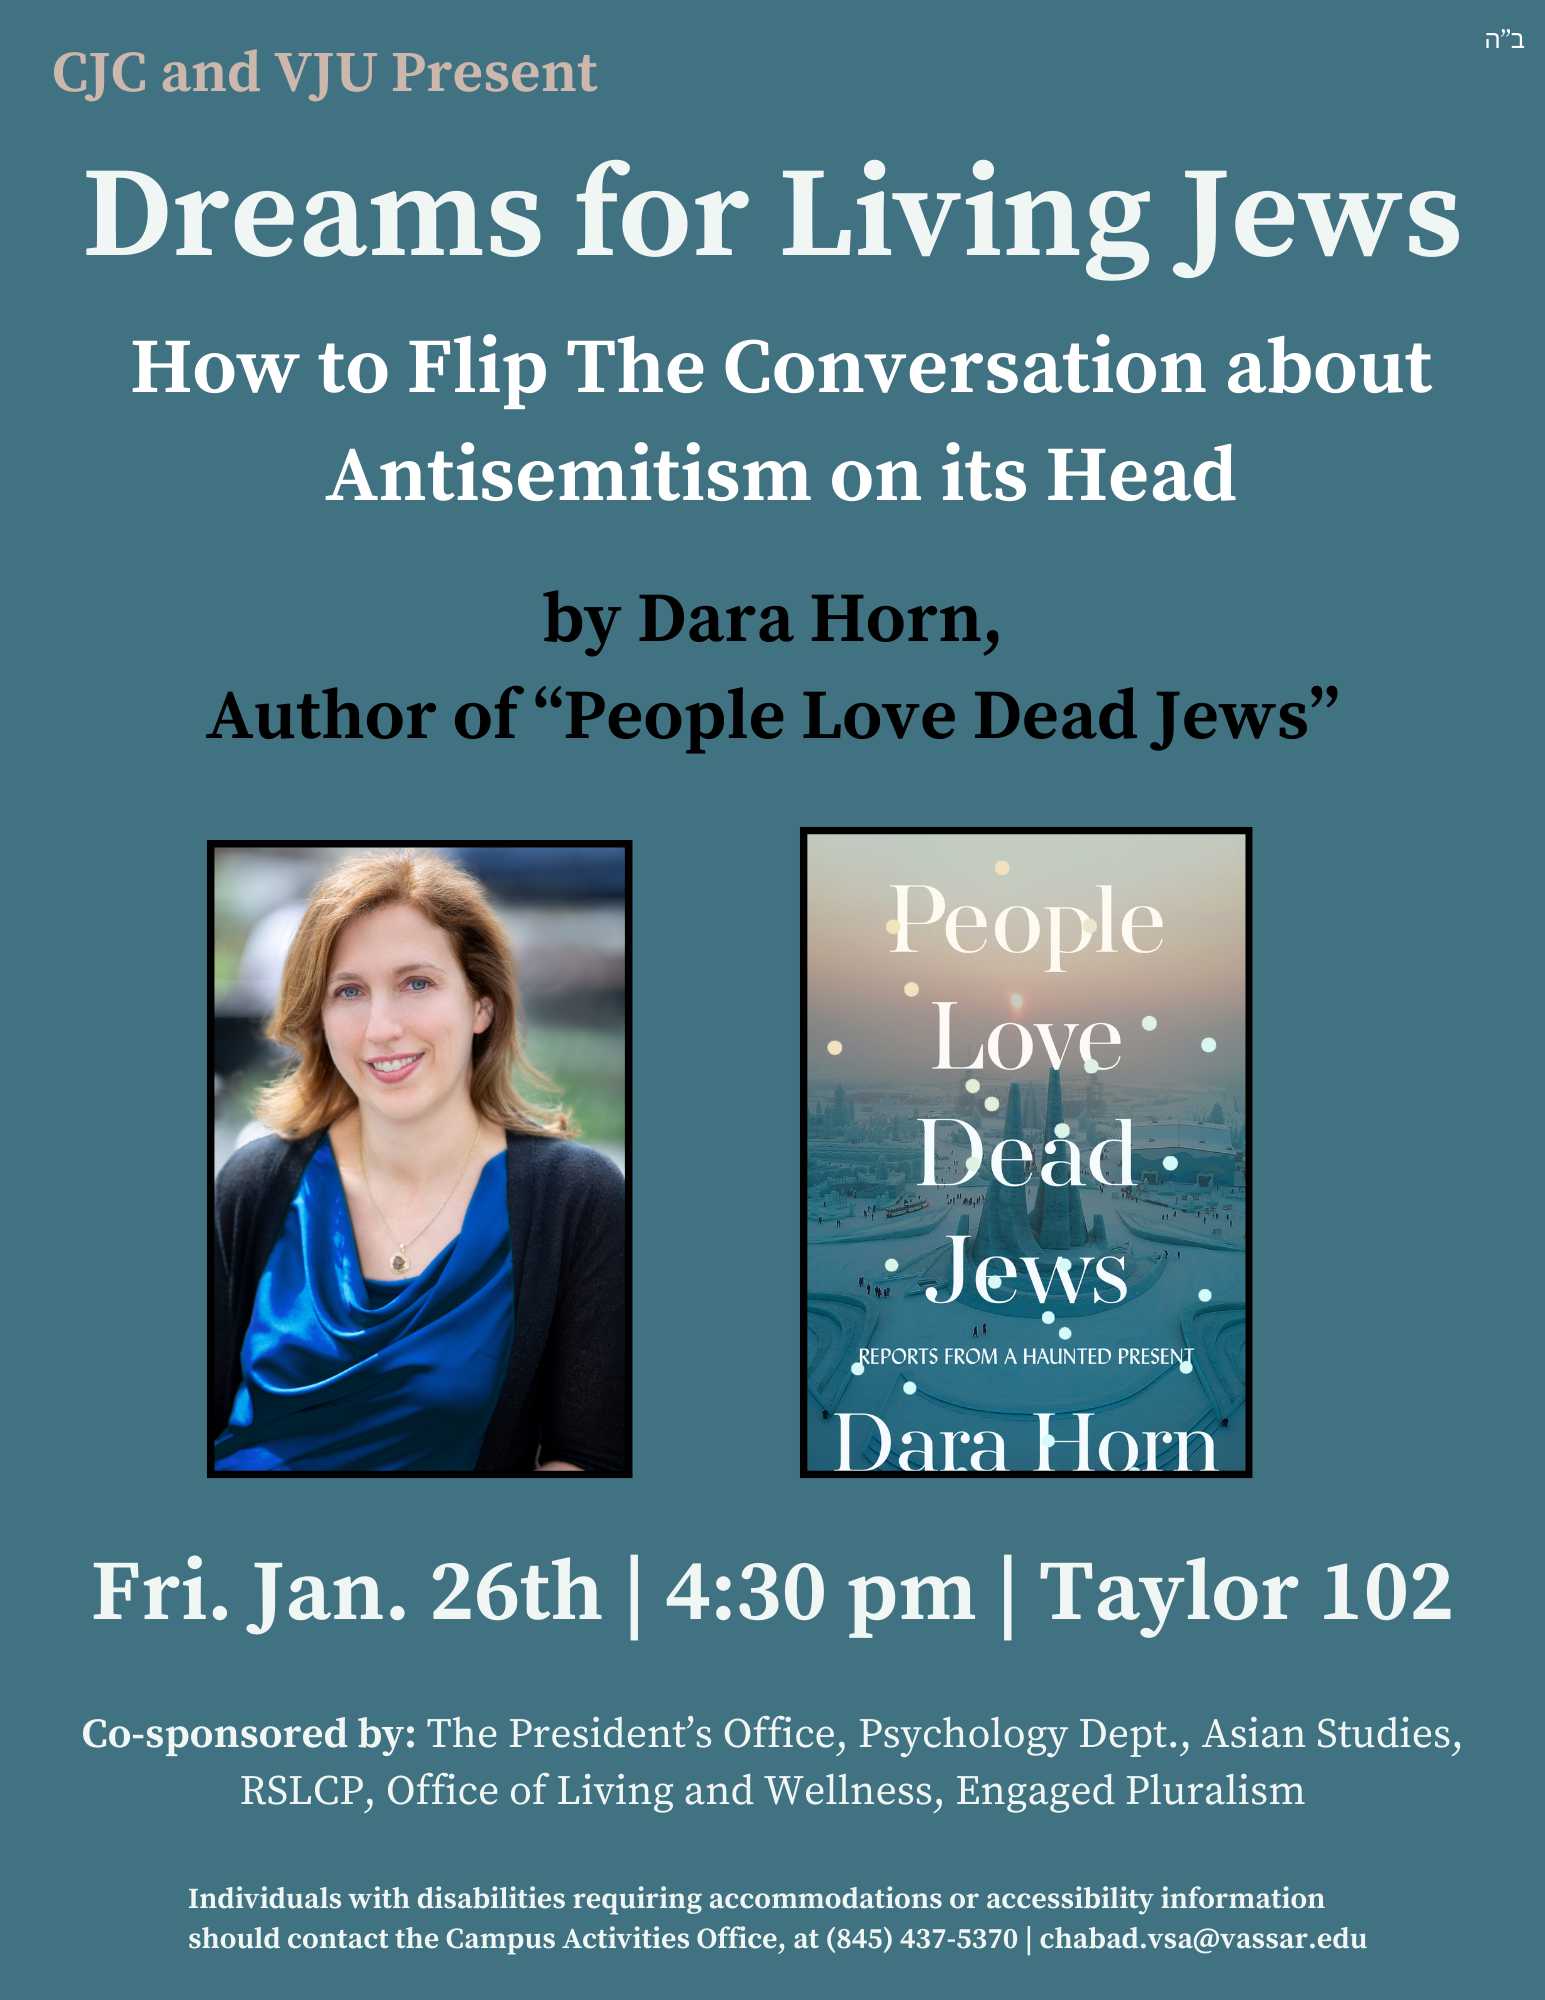 A poster with the text "CJC and VIU Present 'Dreams for Living Jews: How to Flip The Conversation about Antisemitism on its Head' by Dara Horn, Author of "People Love Dead Jews". Friday, January 26th, at 4:30 p.m. in Taylor 102. Co-sponsored by: The President's Office, Psychology Dept., Asian Studies, RSLCP, Office of Living and Wellness, and Engaged Pluralism".